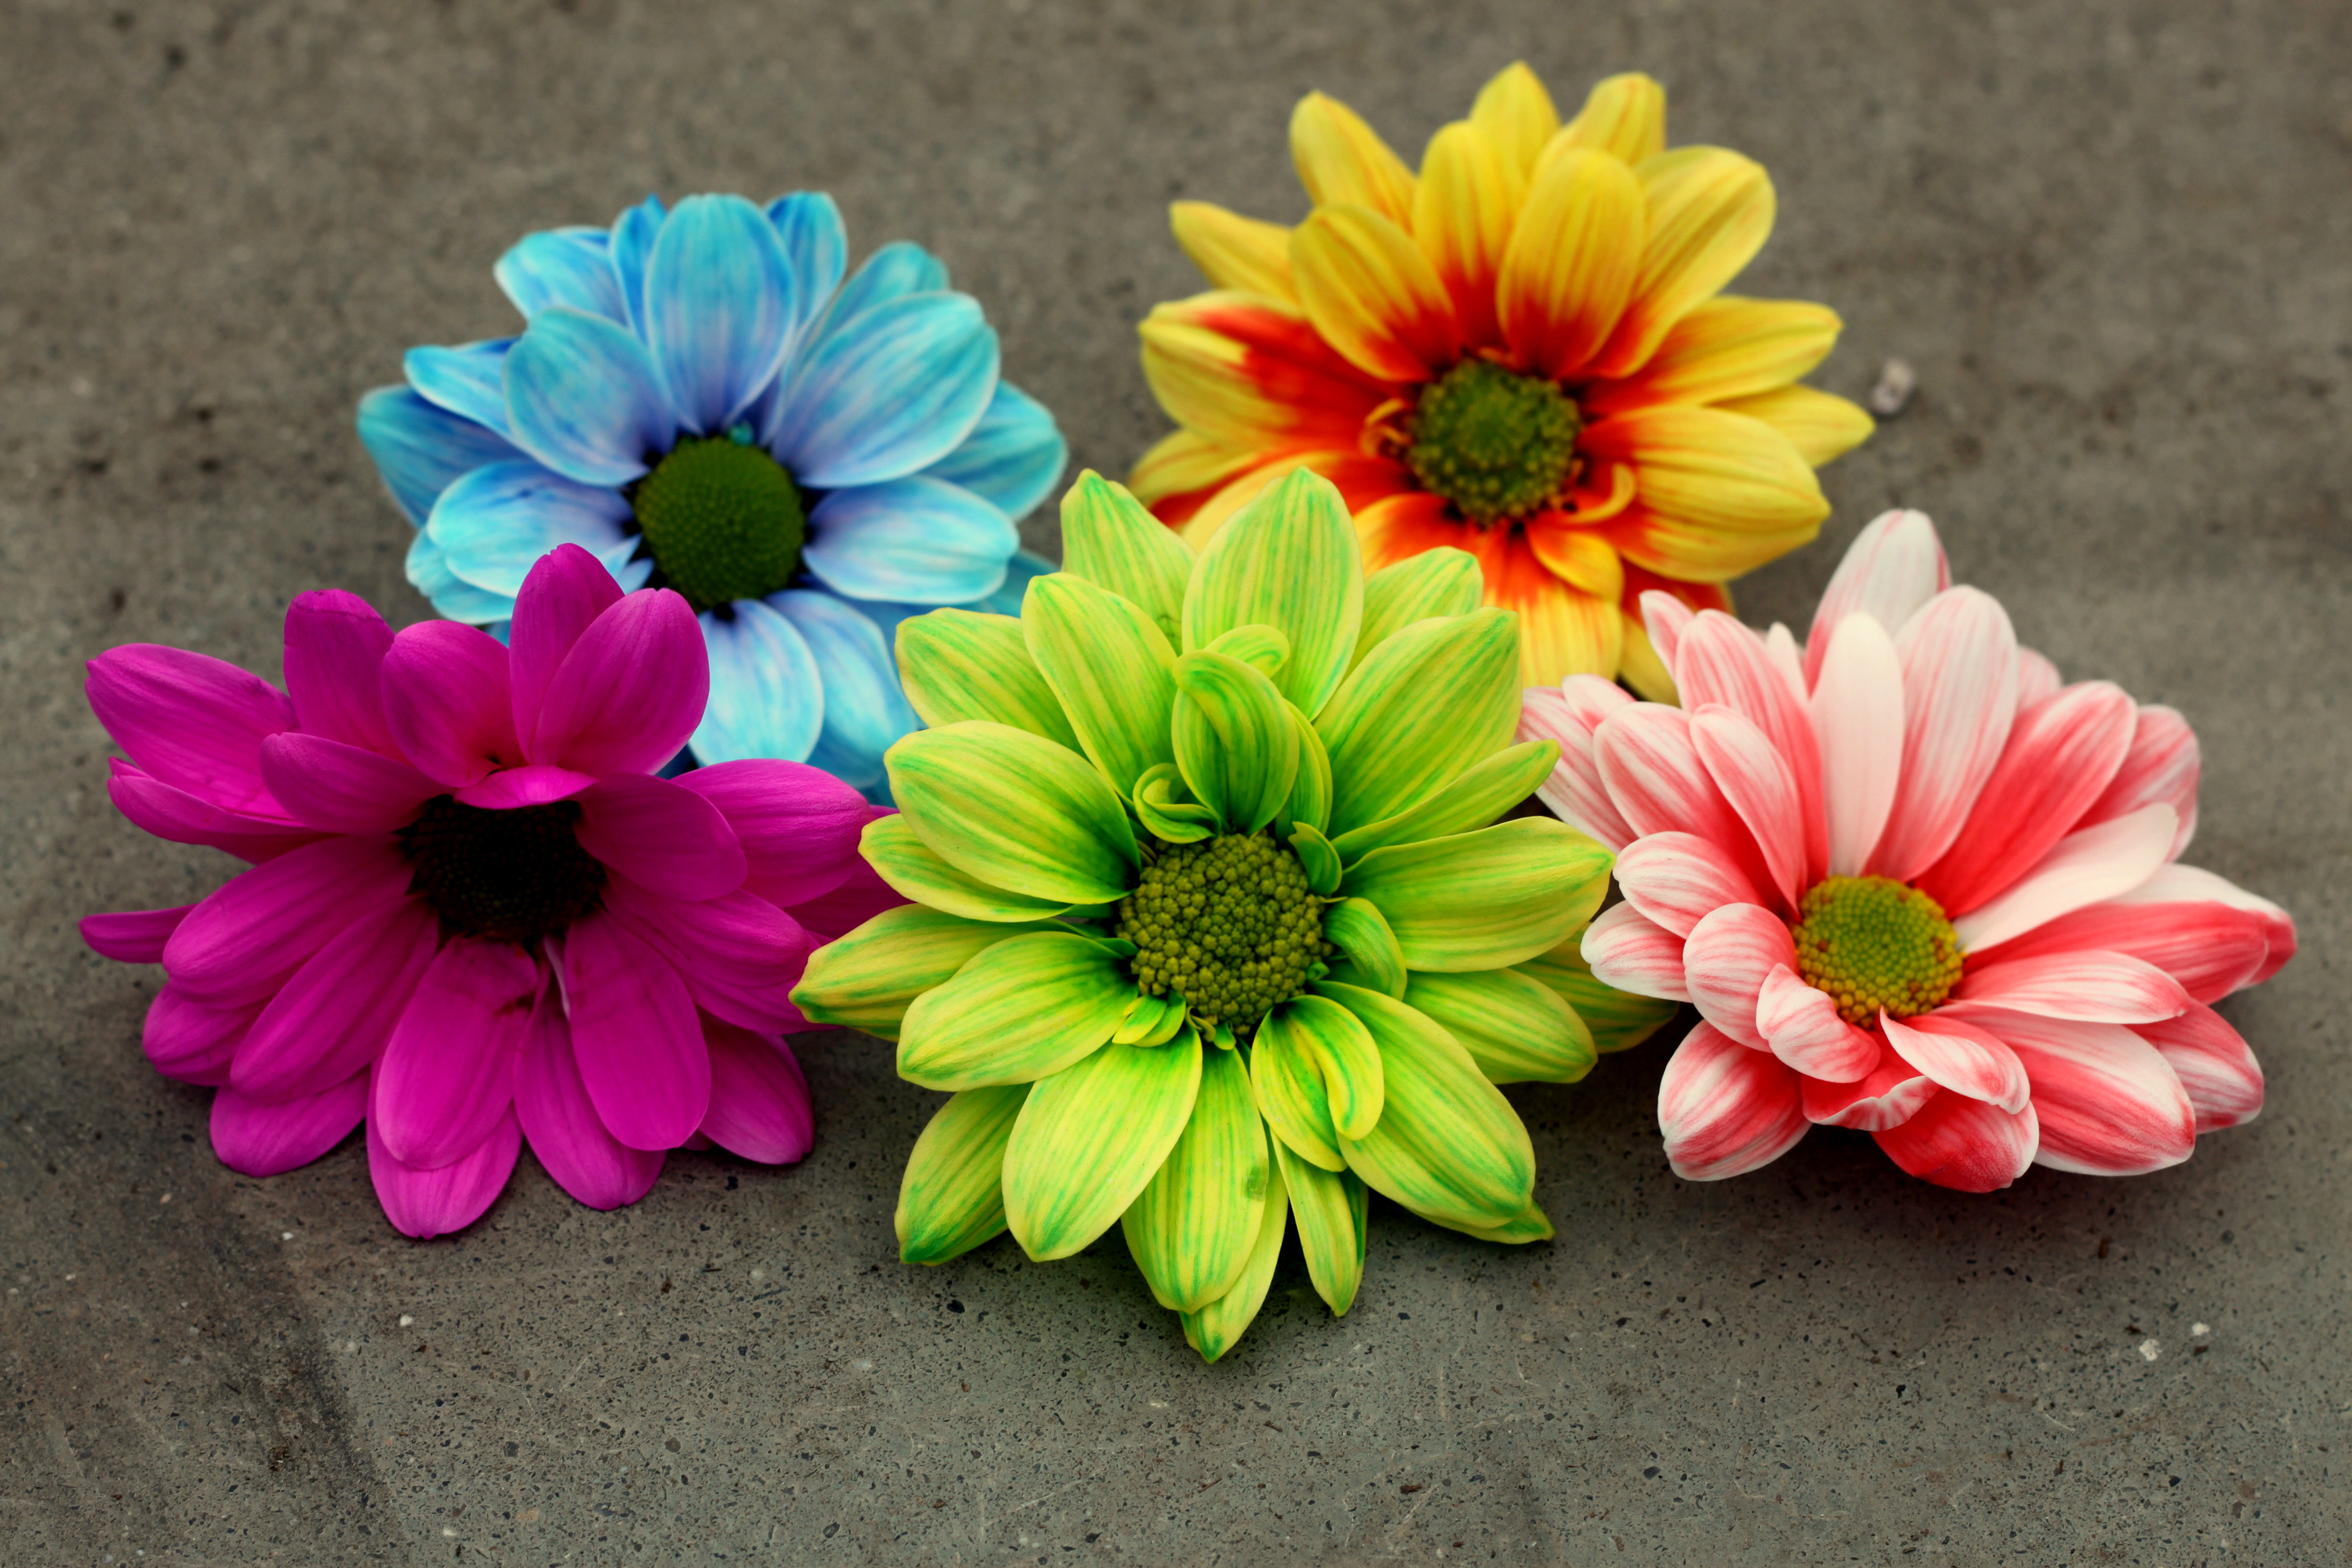 Colorful Gerberas 4k Ultra HD Wallpaper and Background Image